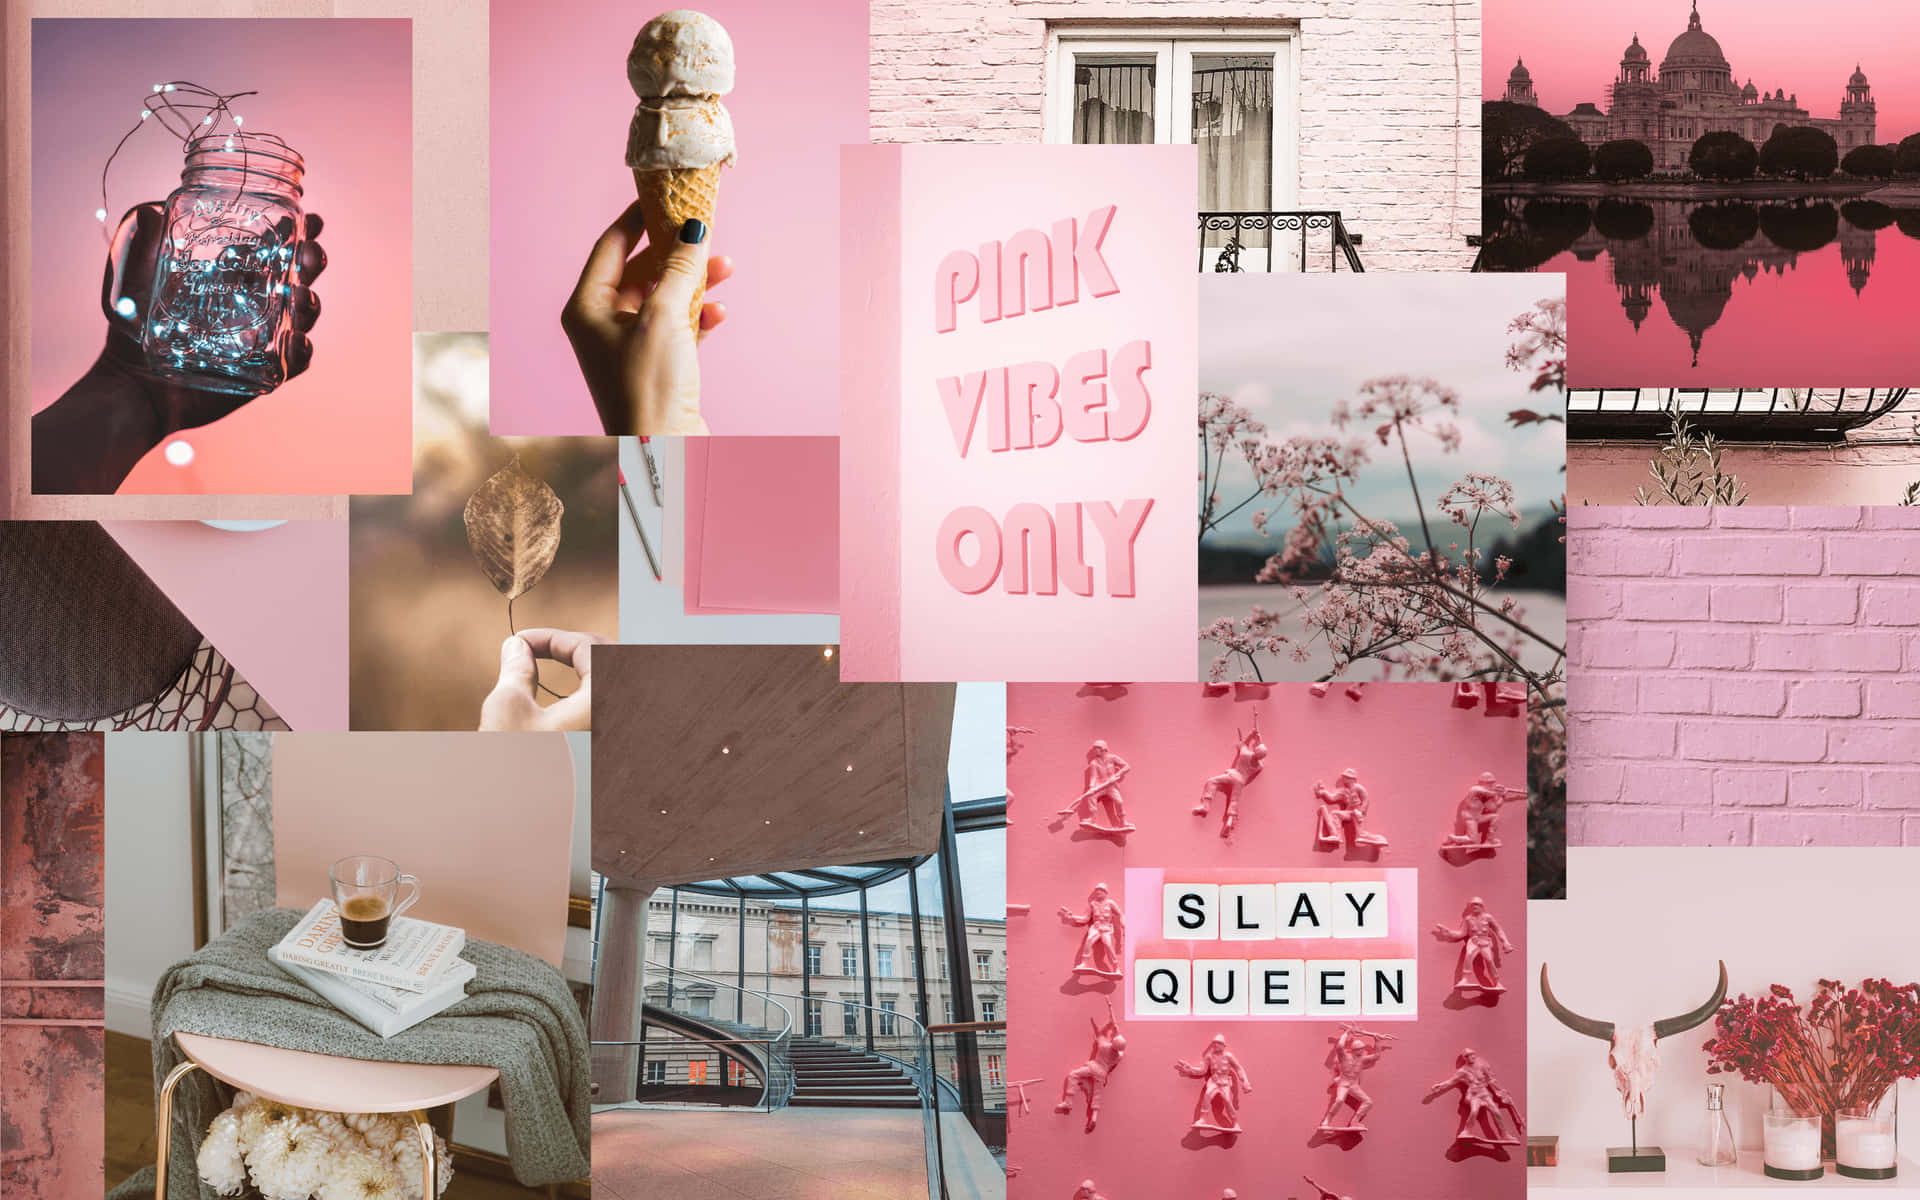 Download Pink Vibes Only - Collage Wallpaper | Wallpapers.com